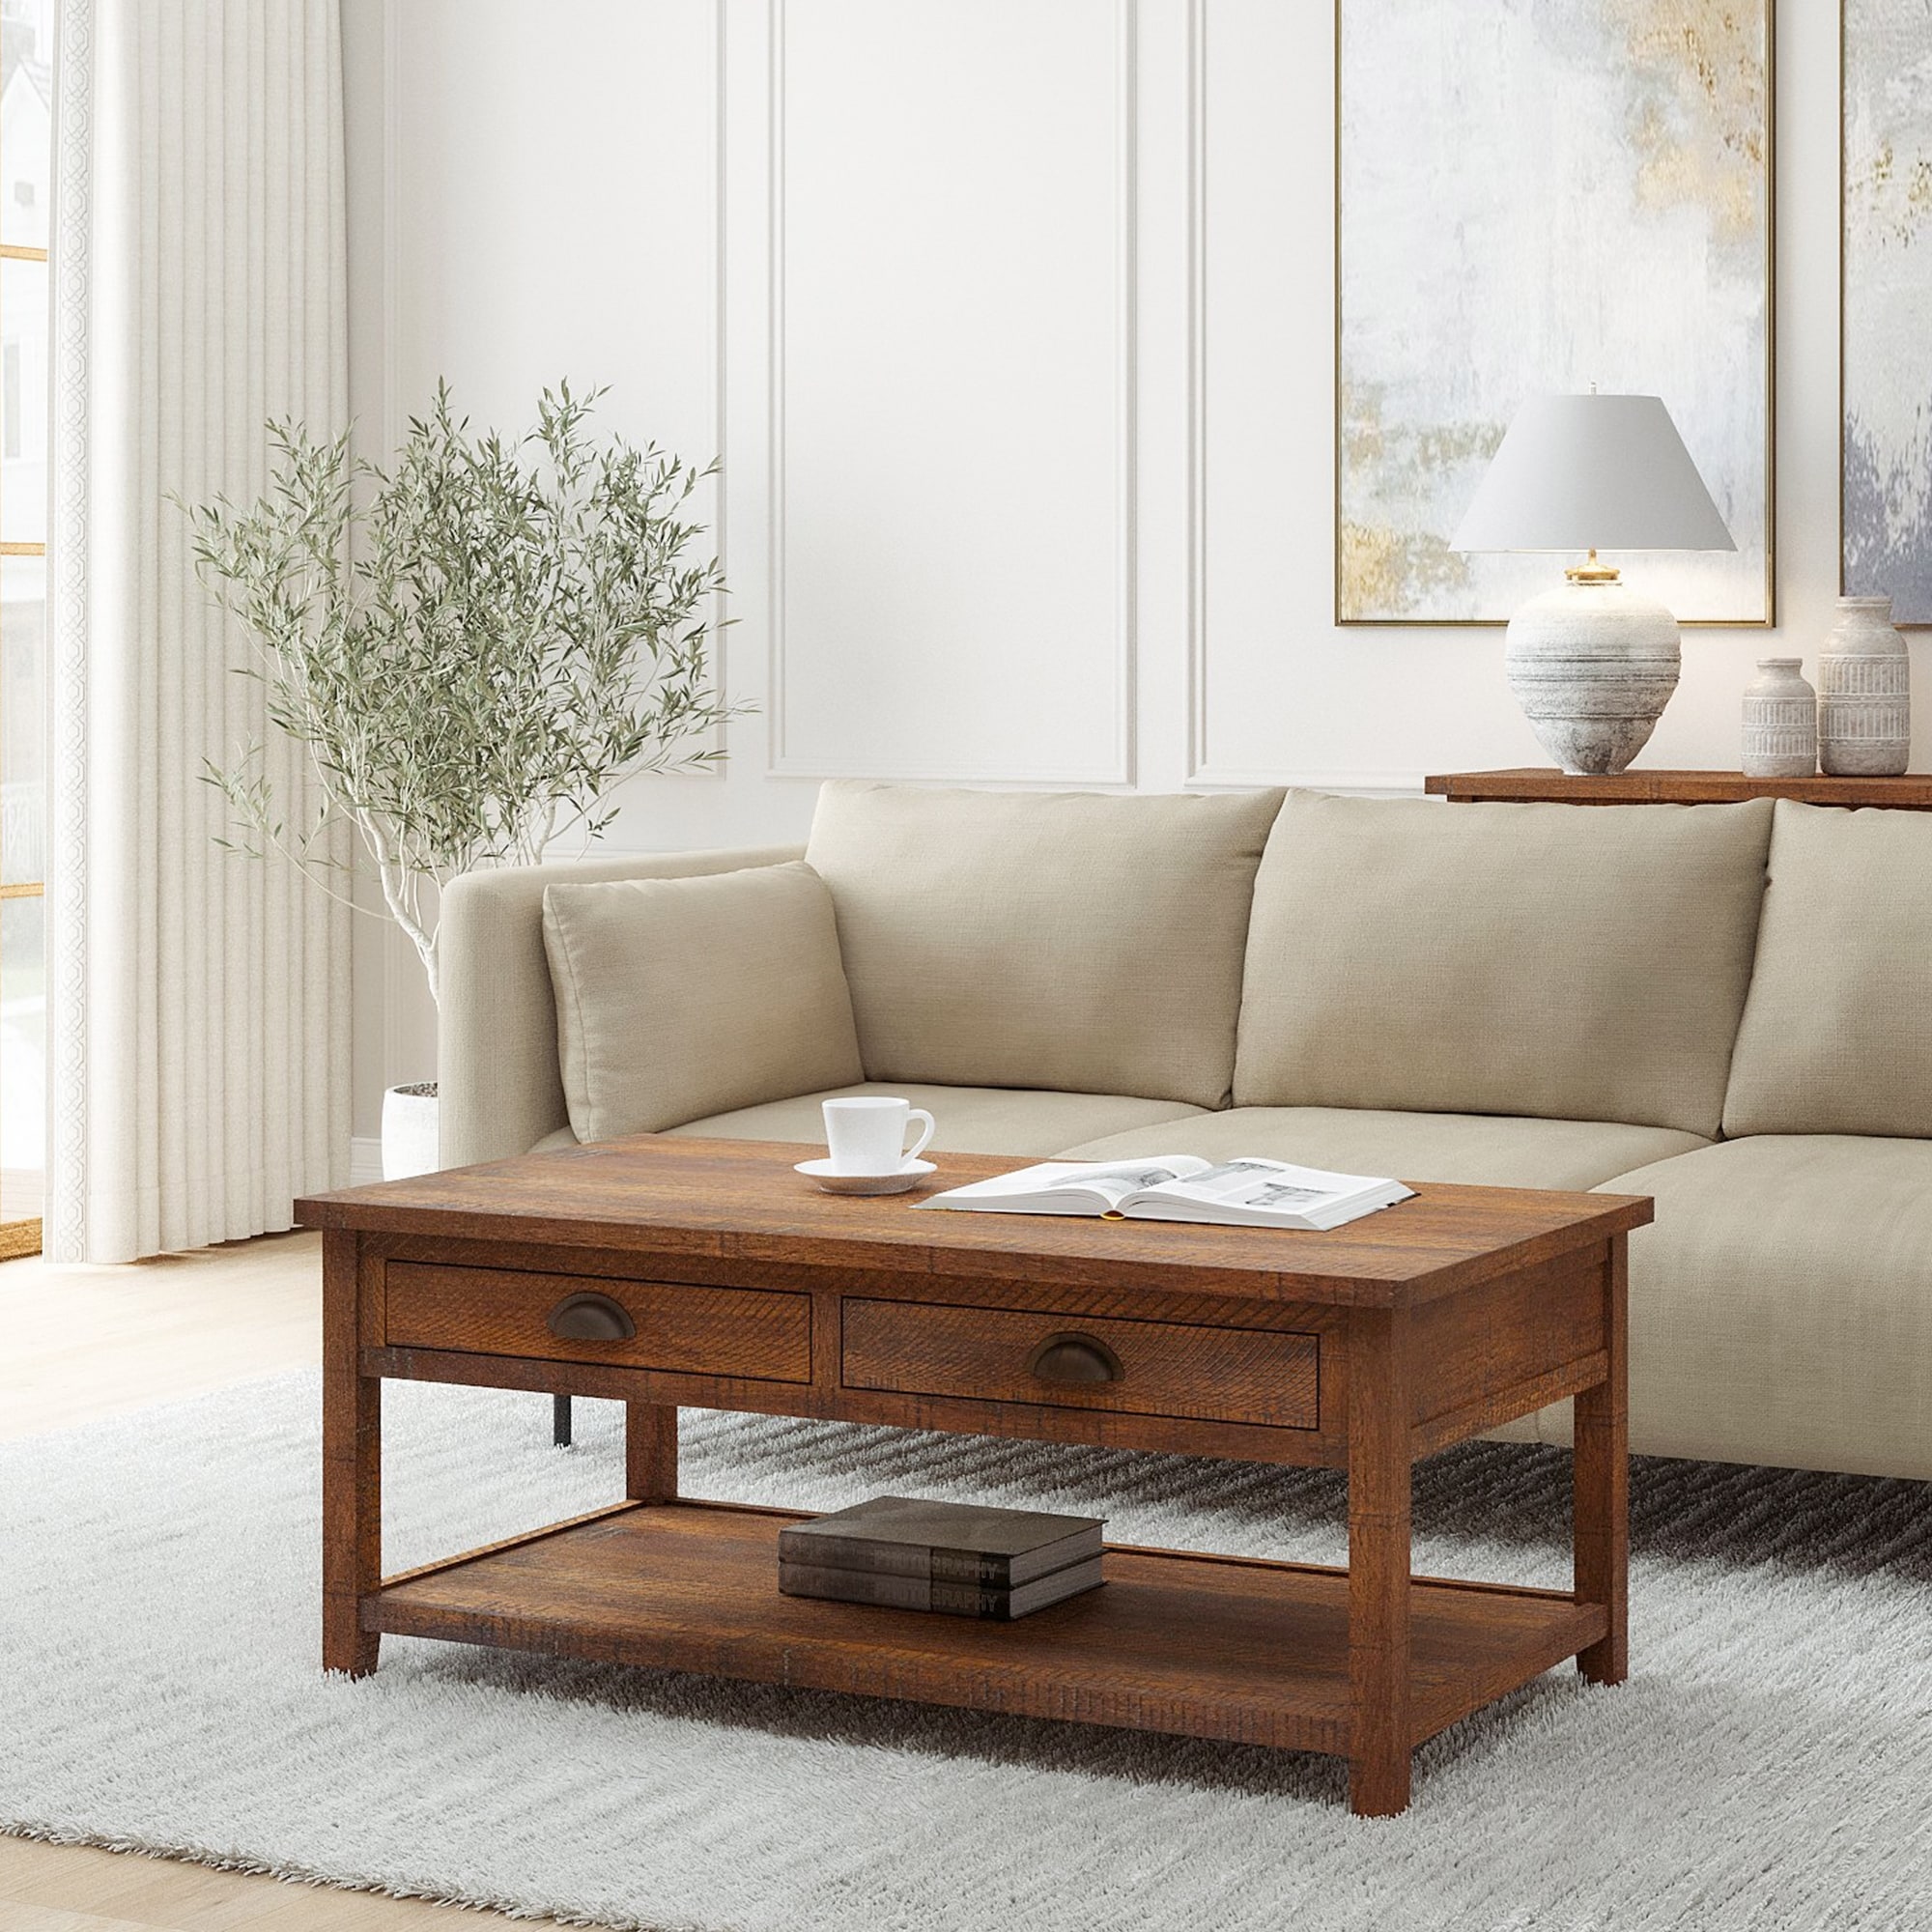 Rough Sawn Wash Wood Sofa Table Crafted with an open design plus a natural wood-grain finish,Sofa Tables